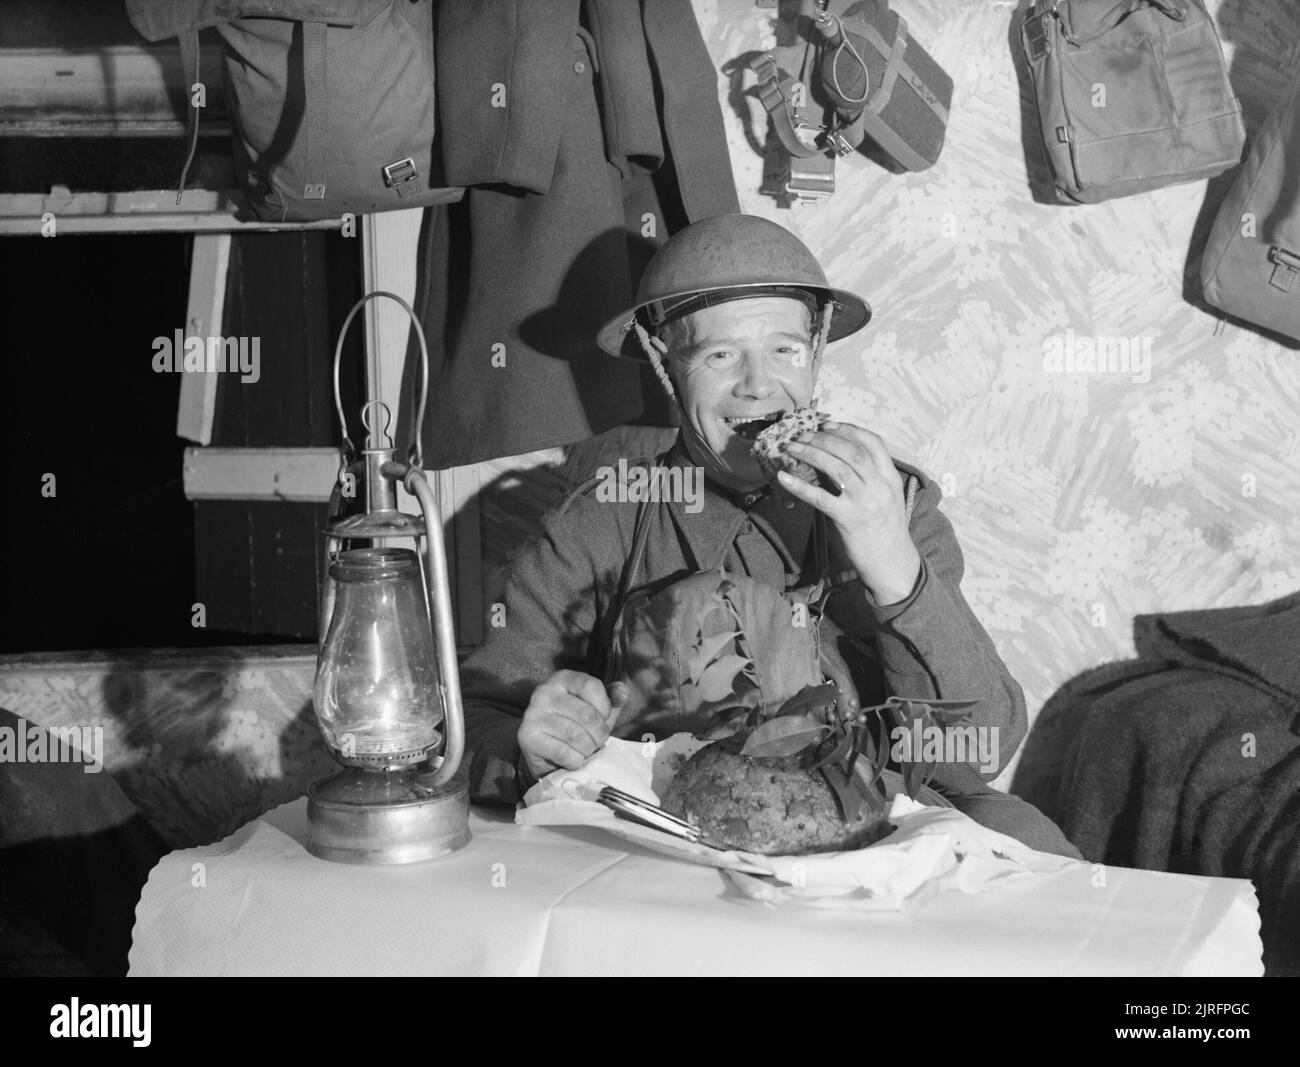 The British Army in France 1939-40 A soldier tucks into his Christmas pudding, December 1939. Stock Photo